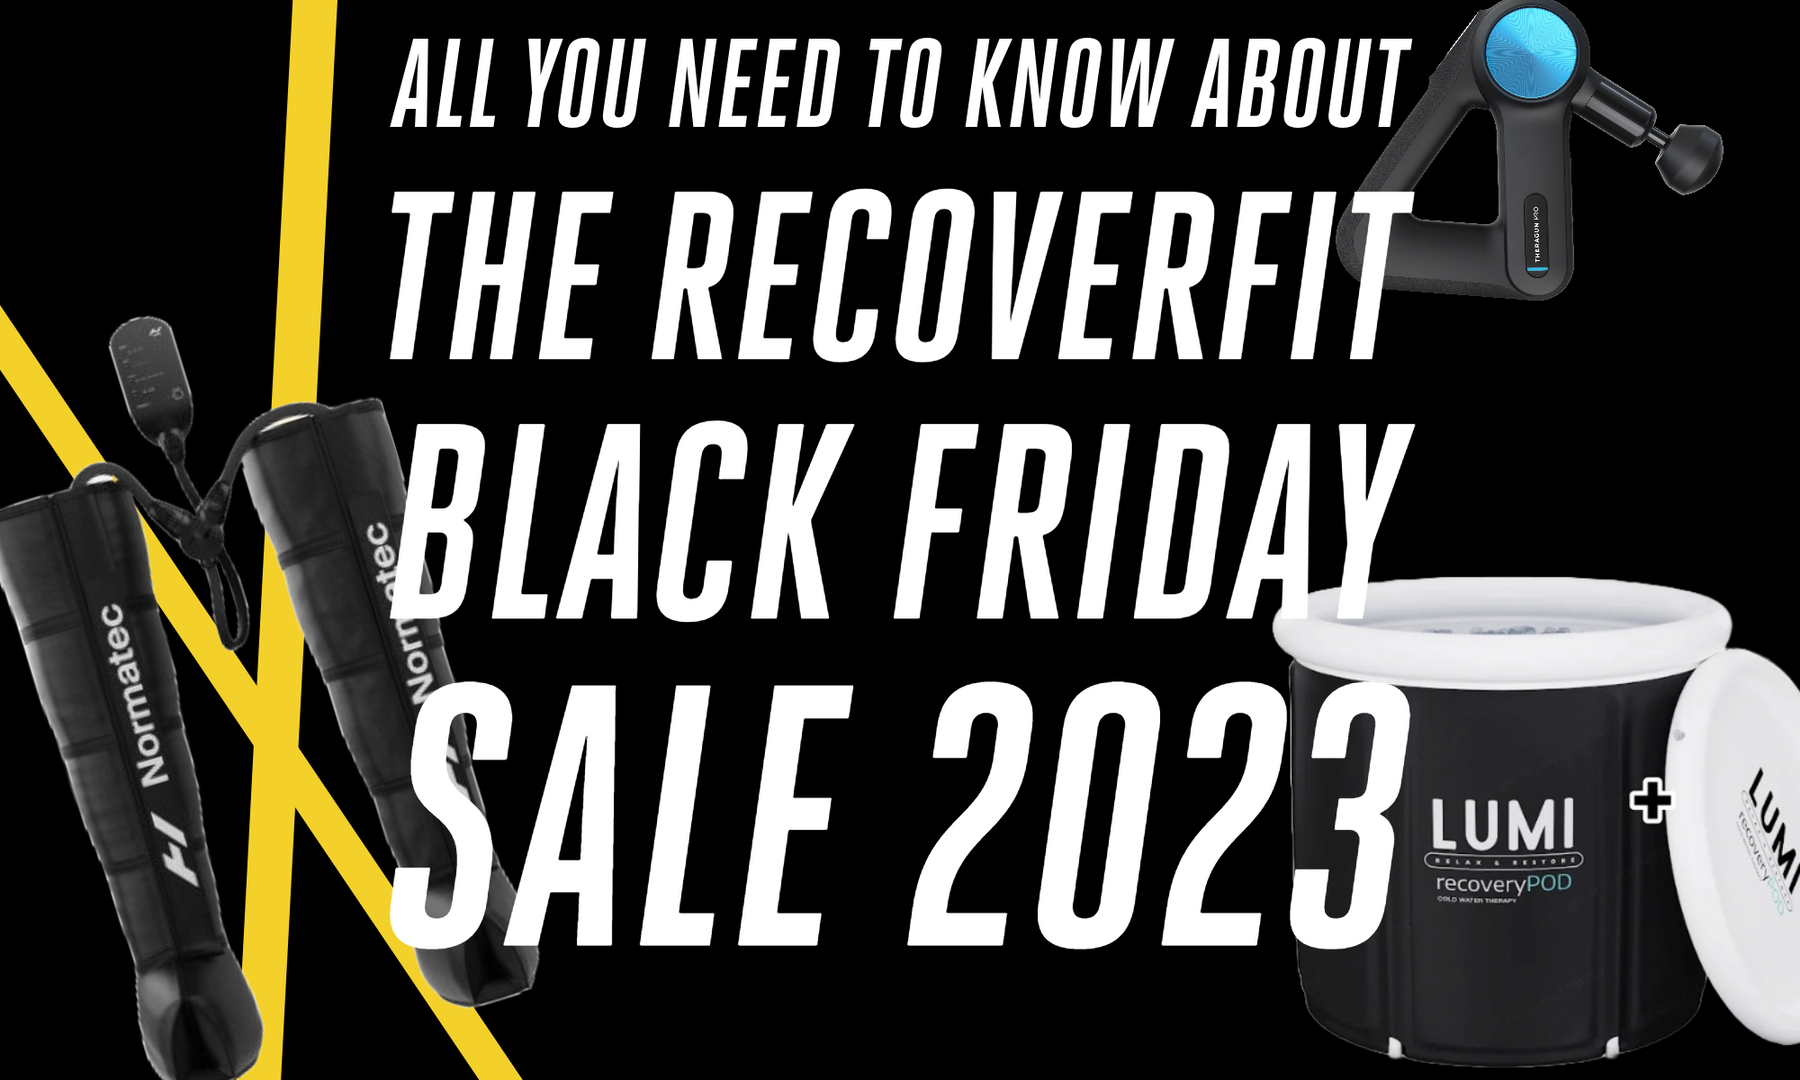 RecoverFit Black Friday 2023